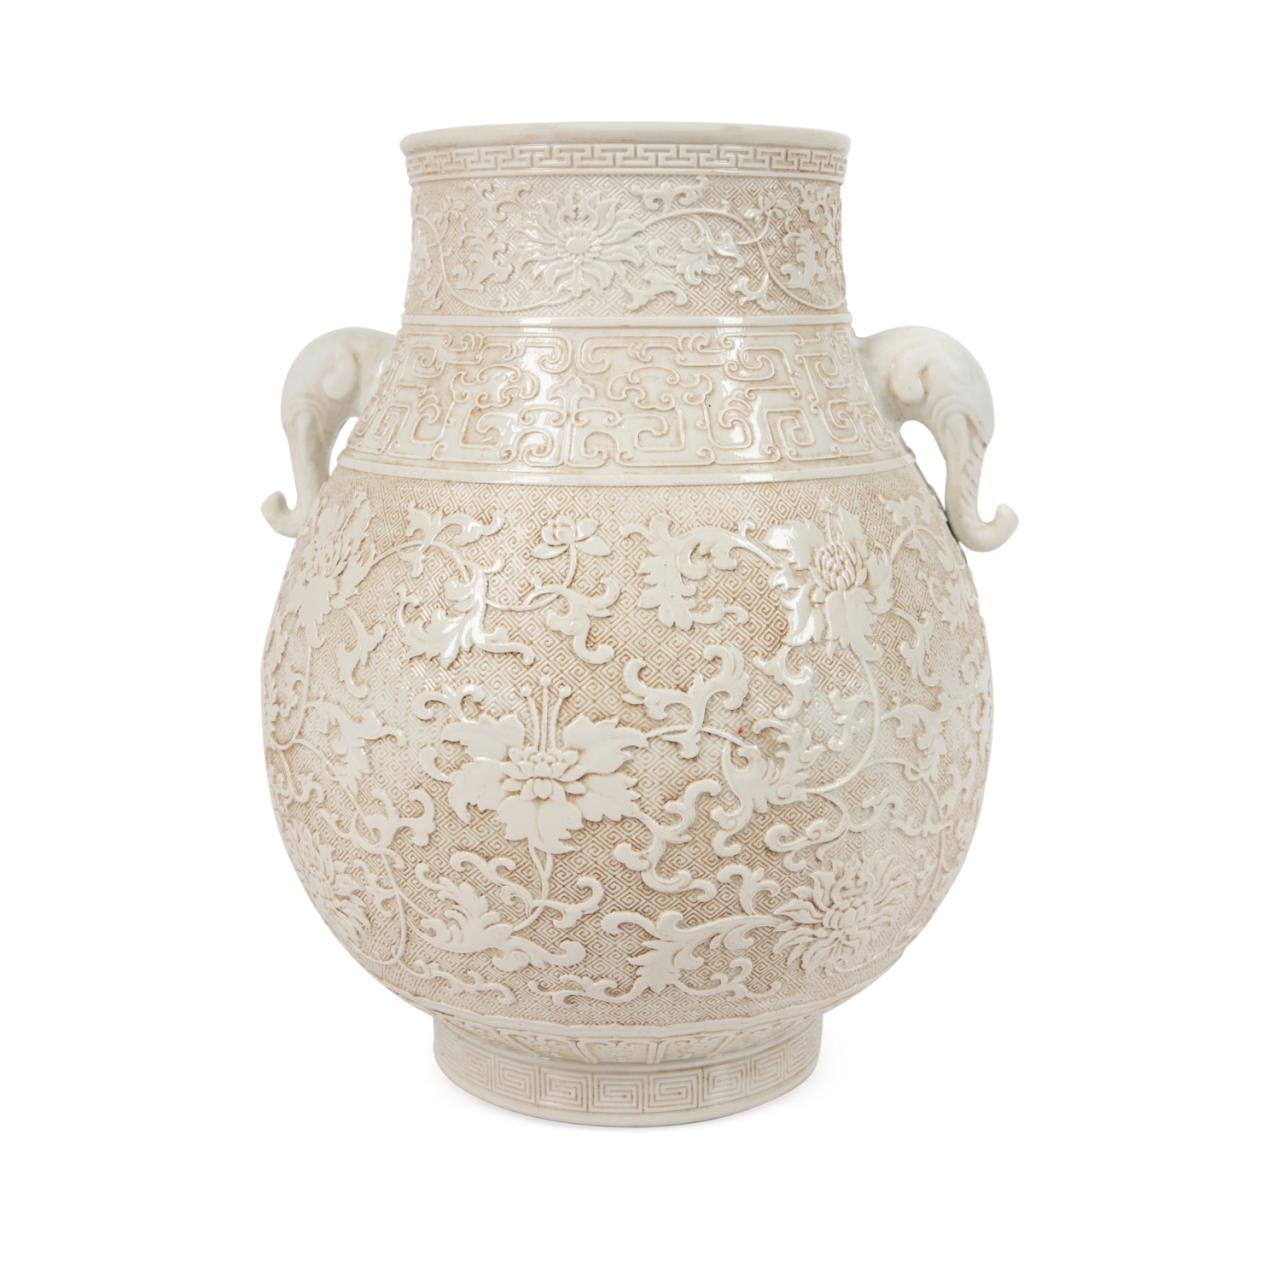 CHINESE CARVED BLANC DE CHINE HU